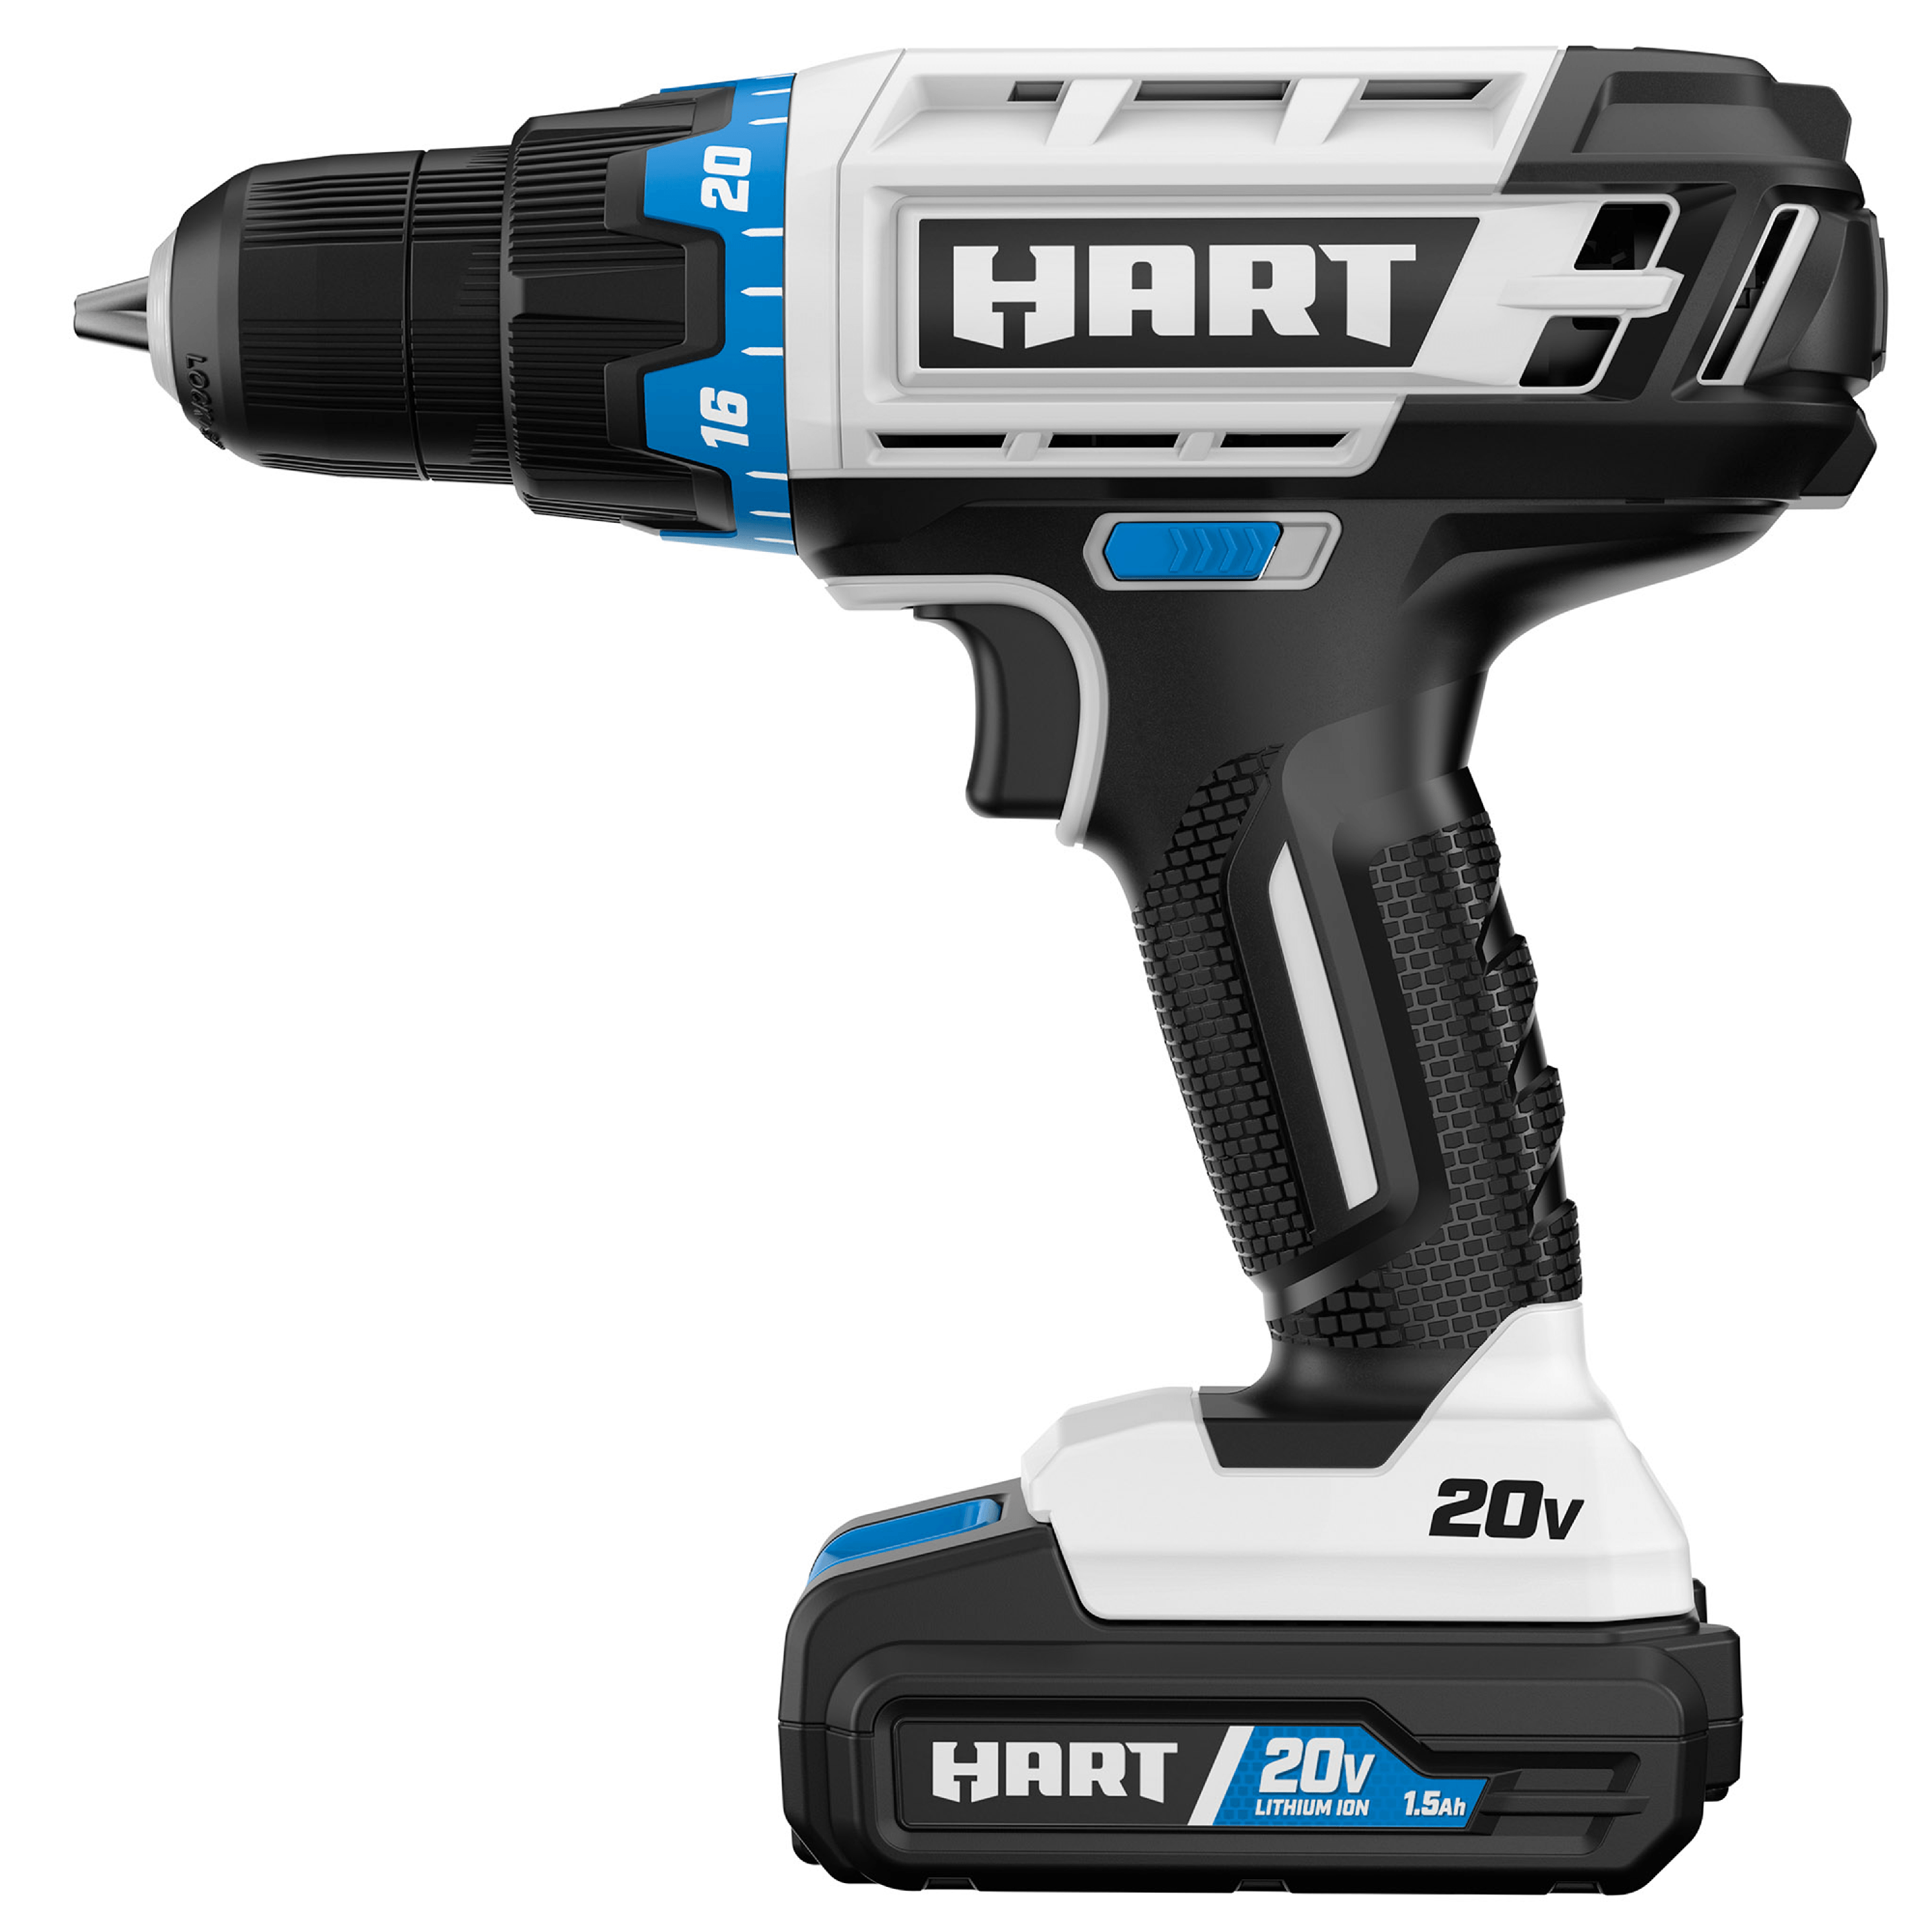 HART 20-Volt 3/8-inch Battery-Powered Drill/Driver Kit, (1) 1.5Ah Lithium-Ion Battery - image 5 of 8